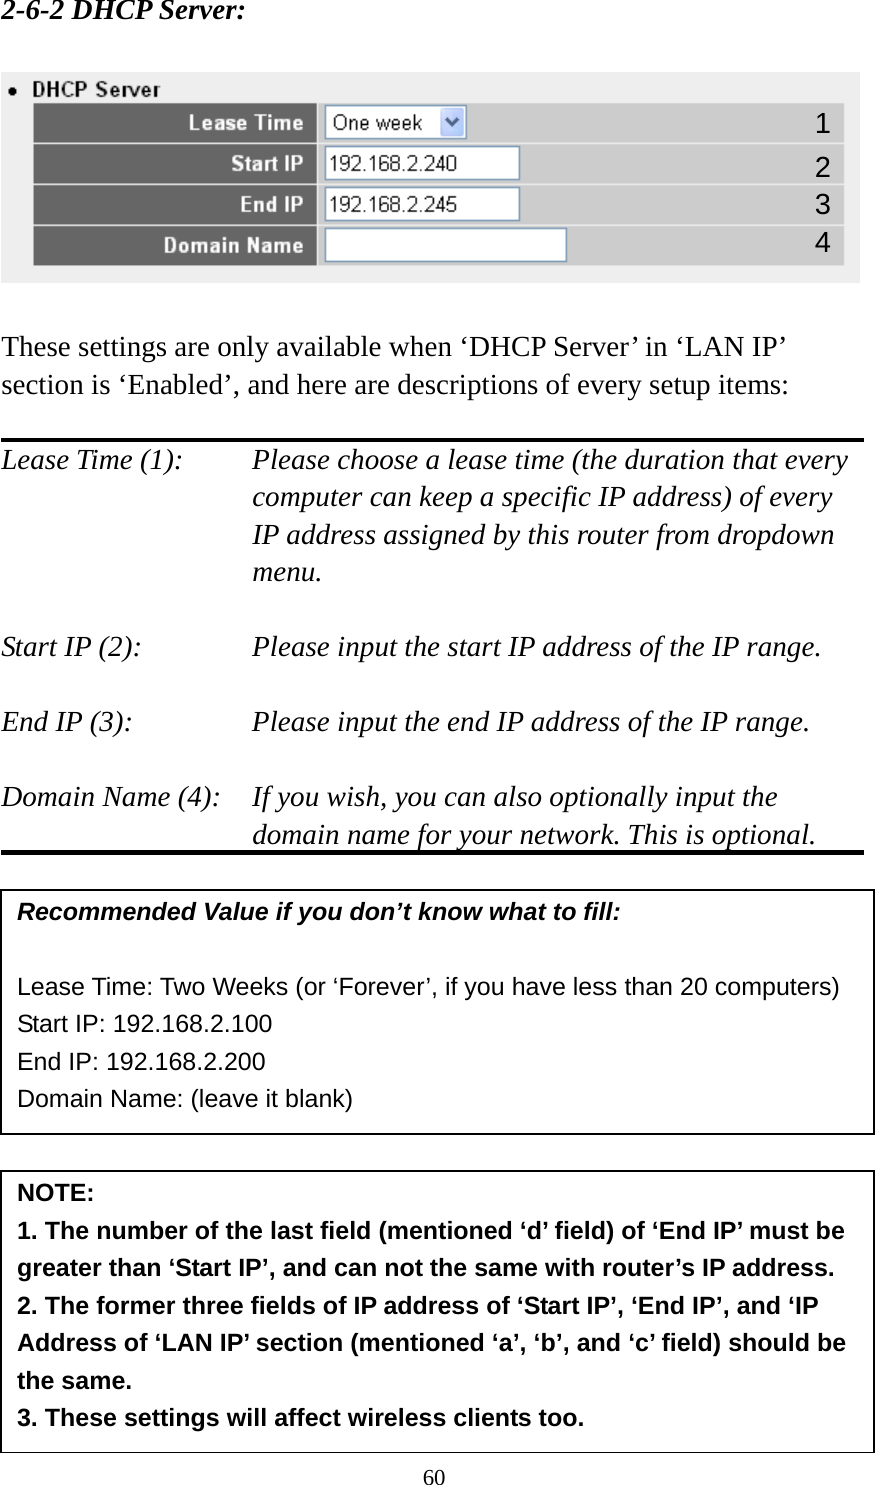 60 2-6-2 DHCP Server:    These settings are only available when ‘DHCP Server’ in ‘LAN IP’ section is ‘Enabled’, and here are descriptions of every setup items:  Lease Time (1):    Please choose a lease time (the duration that every computer can keep a specific IP address) of every IP address assigned by this router from dropdown menu.  Start IP (2):      Please input the start IP address of the IP range.  End IP (3):       Please input the end IP address of the IP range.  Domain Name (4):    If you wish, you can also optionally input the domain name for your network. This is optional.                Recommended Value if you don’t know what to fill:  Lease Time: Two Weeks (or ‘Forever’, if you have less than 20 computers) Start IP: 192.168.2.100 End IP: 192.168.2.200 Domain Name: (leave it blank) NOTE:  1. The number of the last field (mentioned ‘d’ field) of ‘End IP’ must be greater than ‘Start IP’, and can not the same with router’s IP address. 2. The former three fields of IP address of ‘Start IP’, ‘End IP’, and ‘IP Address of ‘LAN IP’ section (mentioned ‘a’, ‘b’, and ‘c’ field) should be the same. 3. These settings will affect wireless clients too. 1 3 4 2 